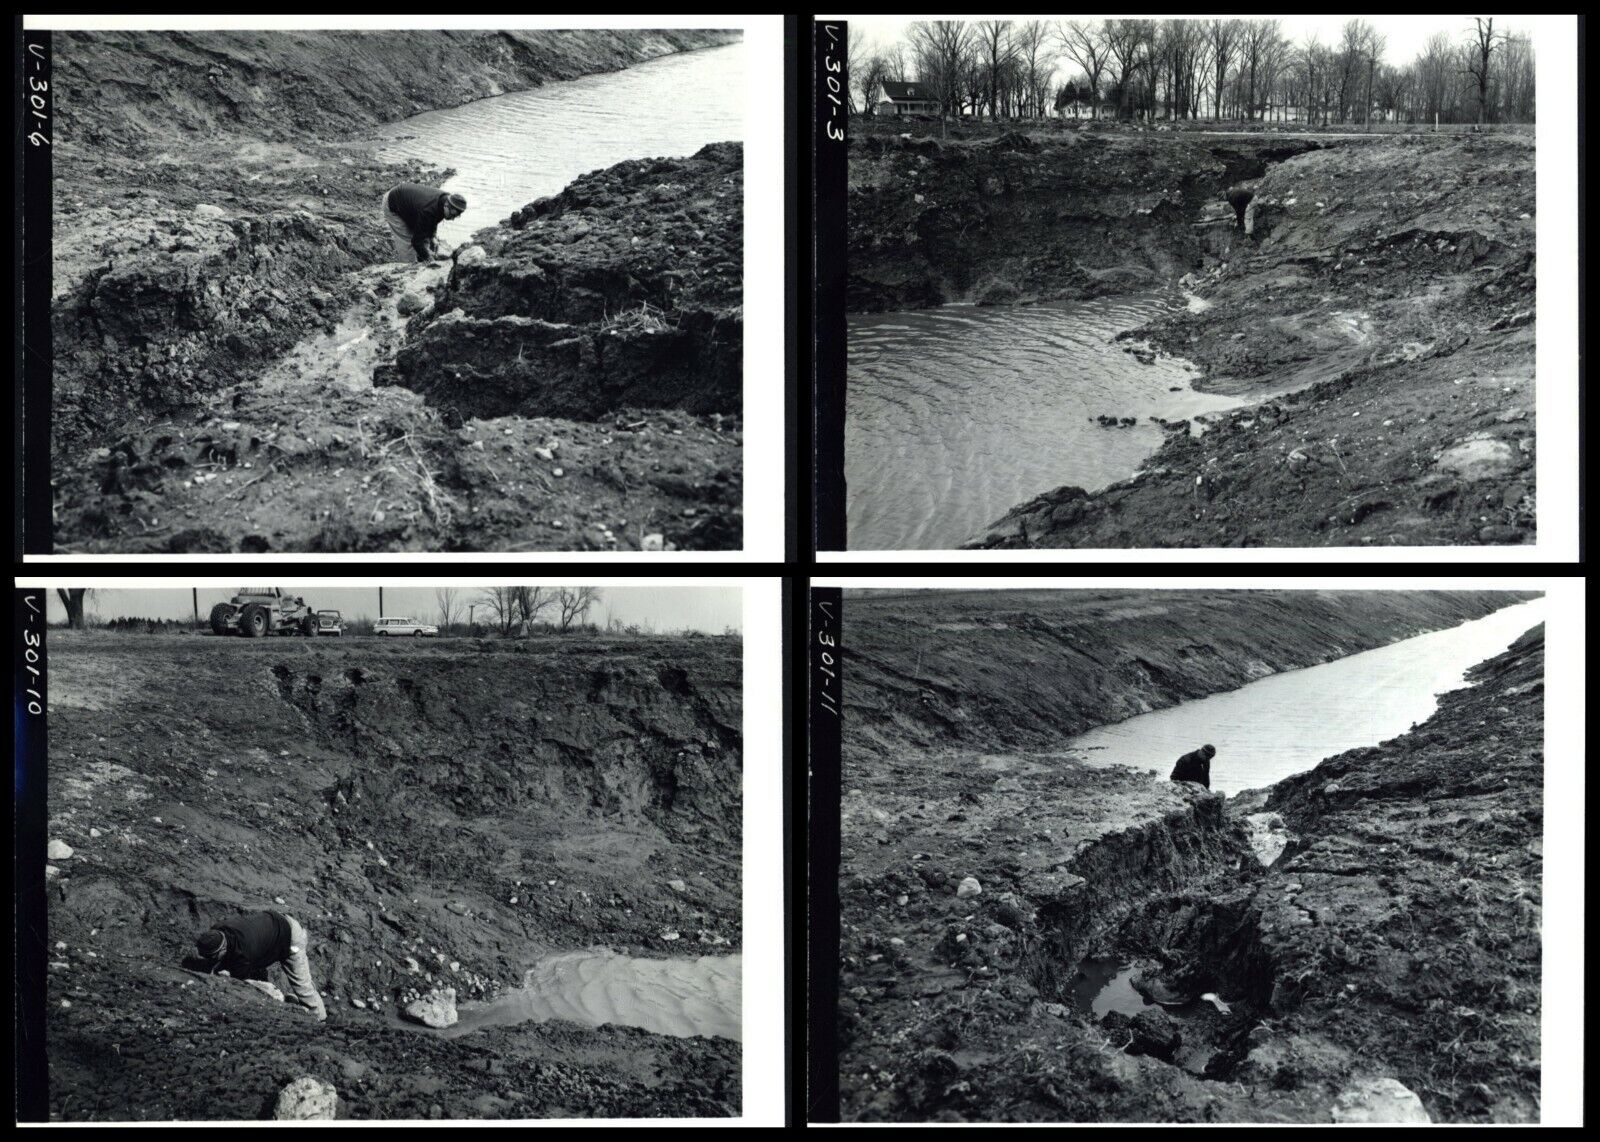 4 Vintage AGRICULTURAL PHOTOGRAPHS - North Hero. VERMONT [Canal Slope Repair]